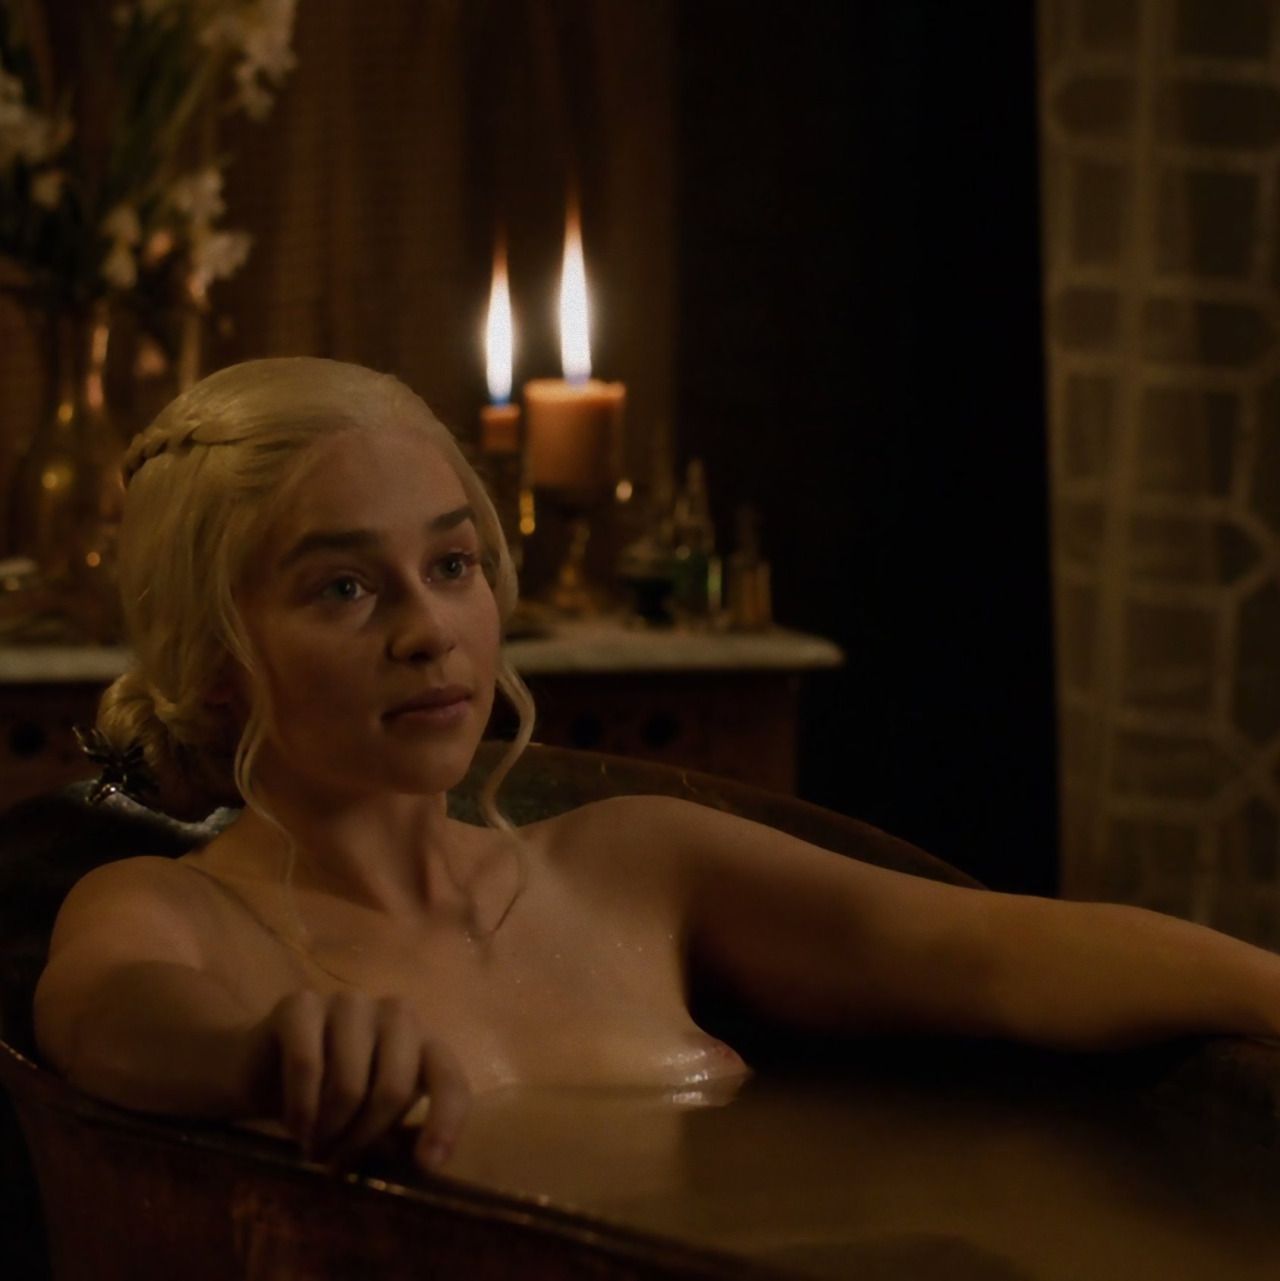 Best Naked Photos - Emilia Clarke naked in Game of Thrones ...